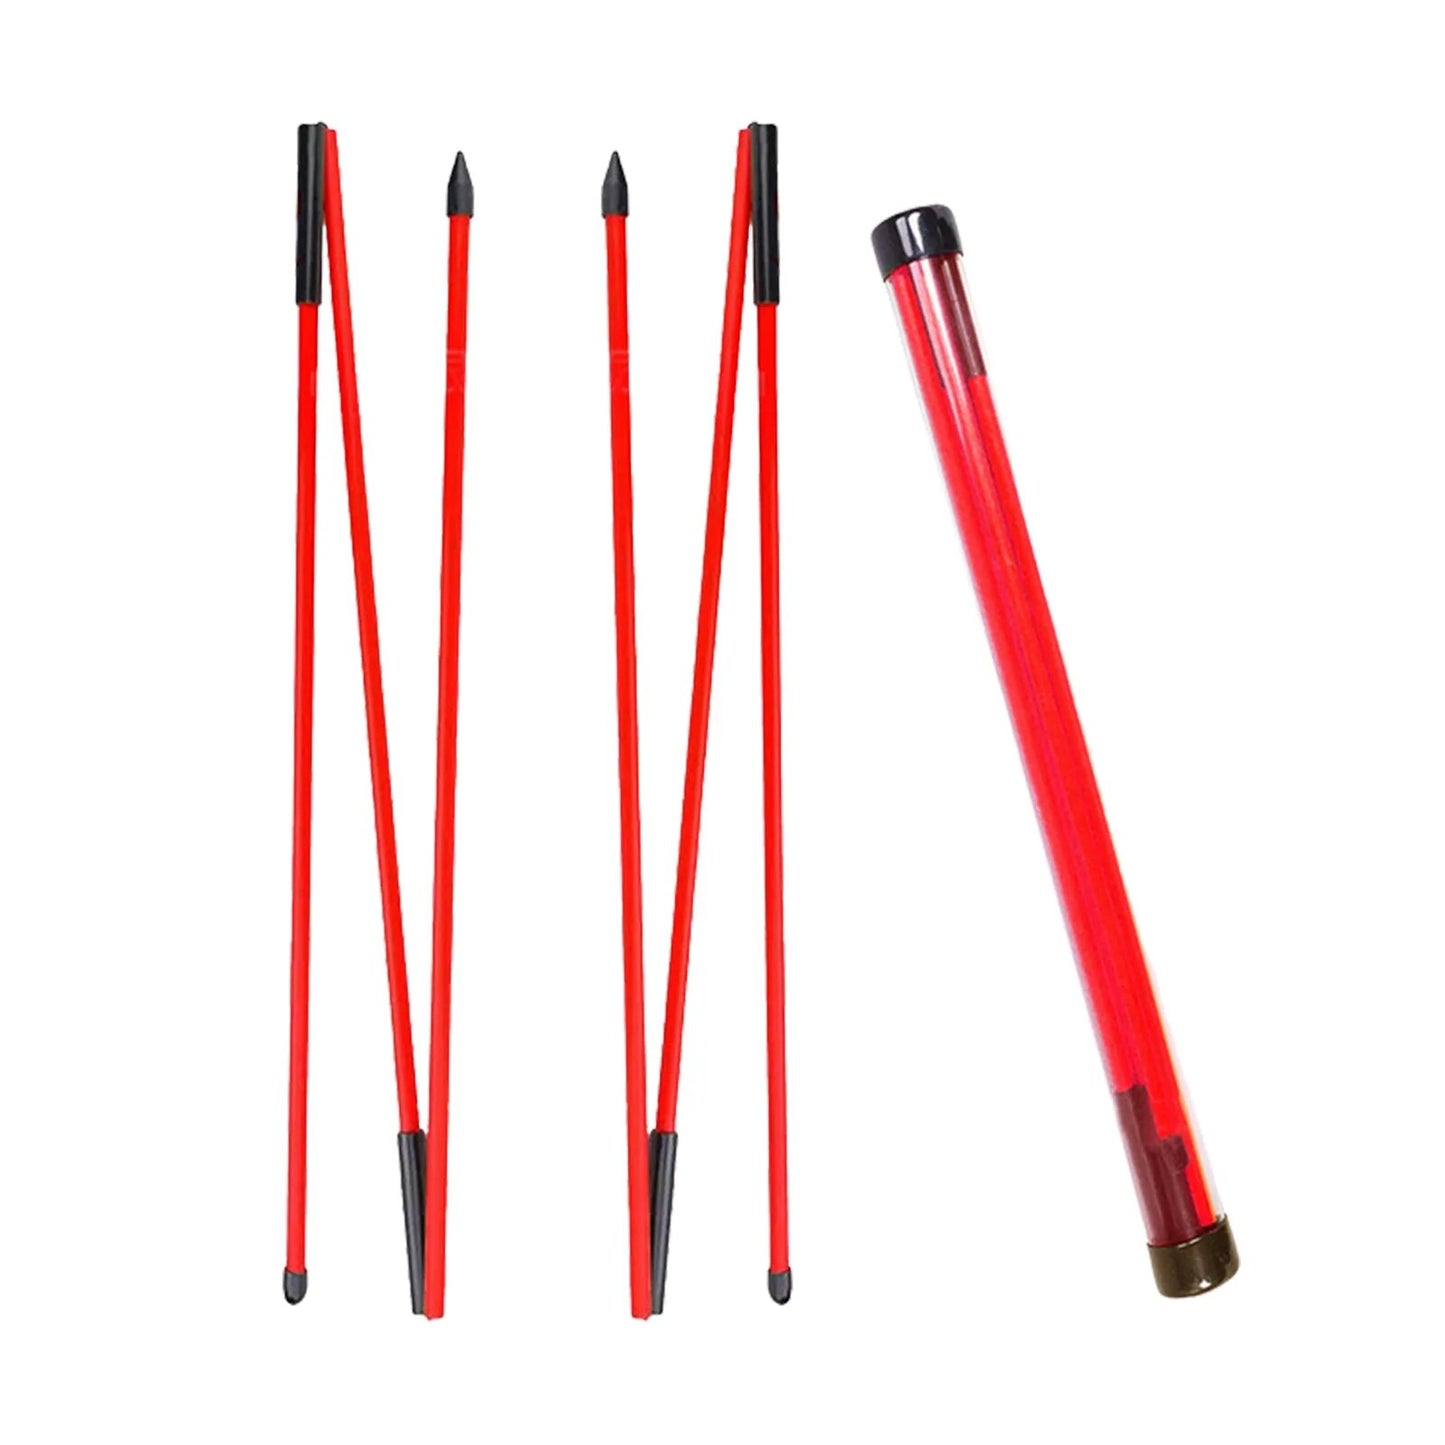 x2 Collapsible Alignment Sticks